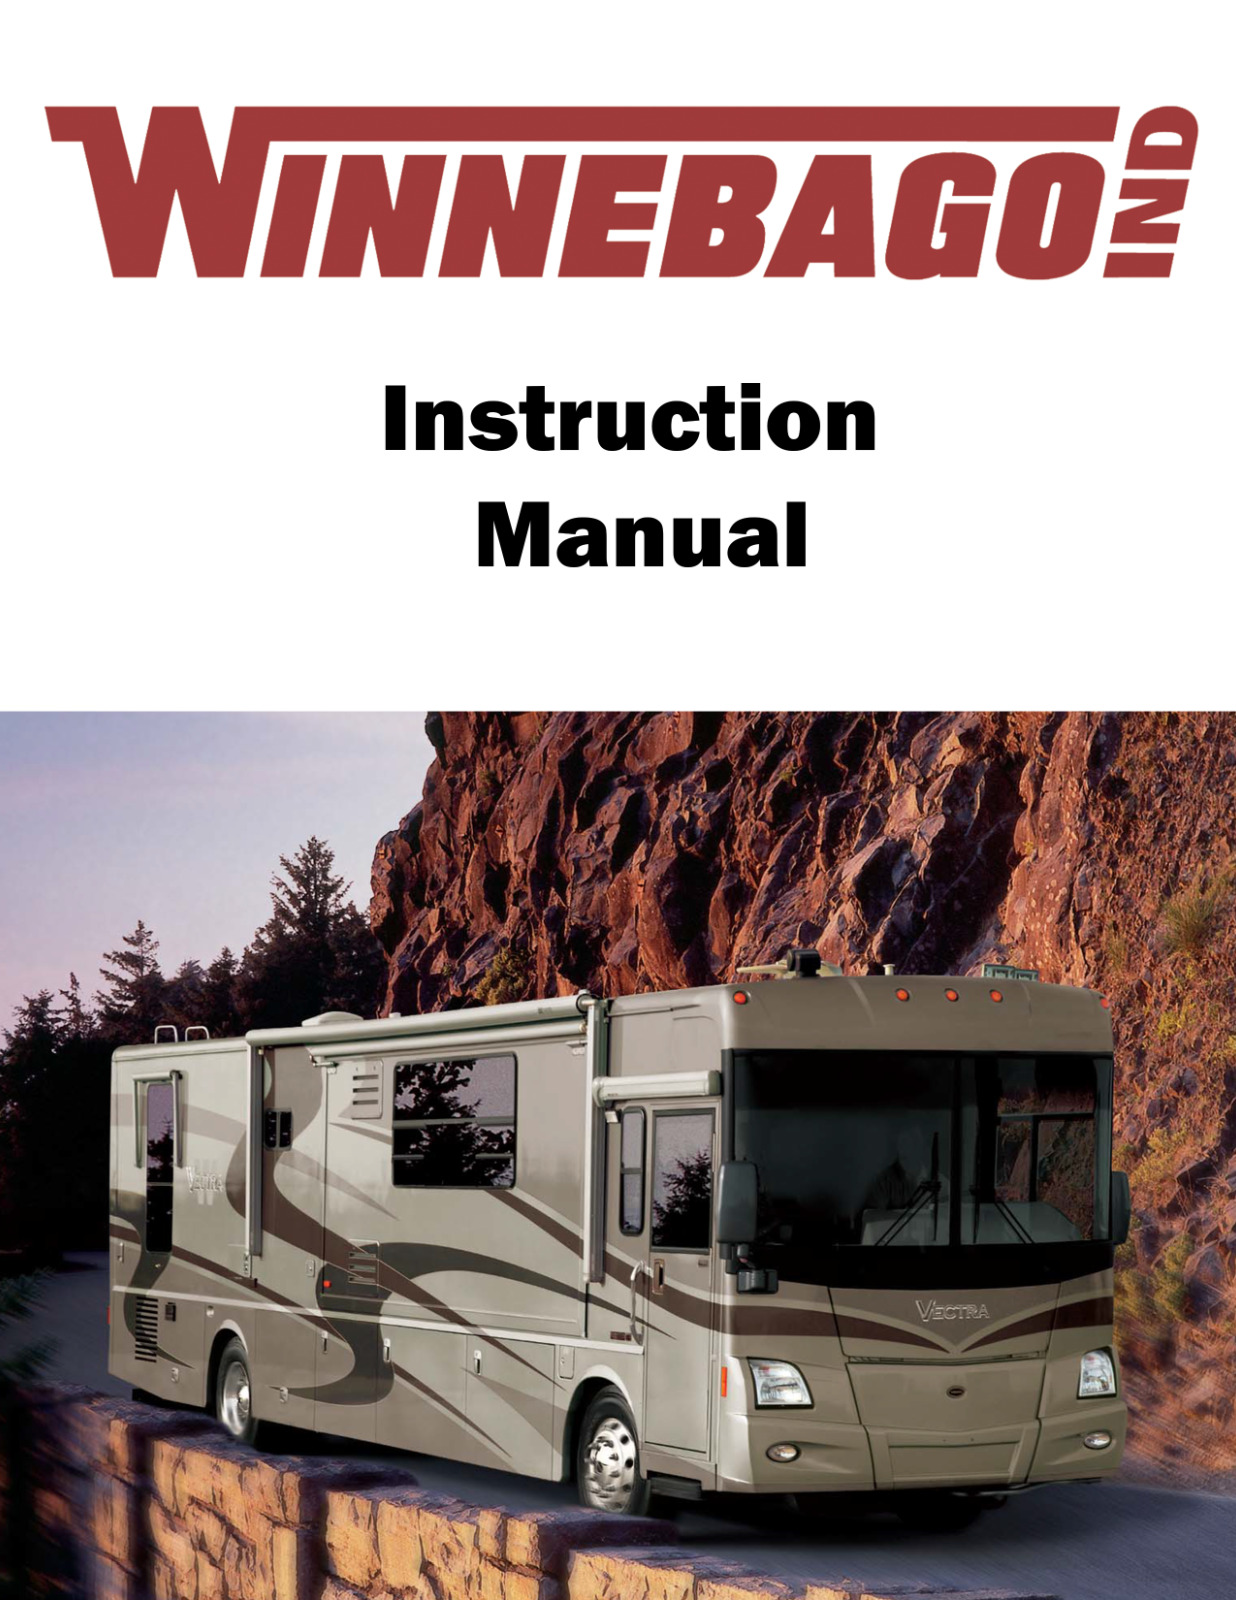 2005 Winnebago Vectra Home Owners Operation Manual User Guide Coil Bound